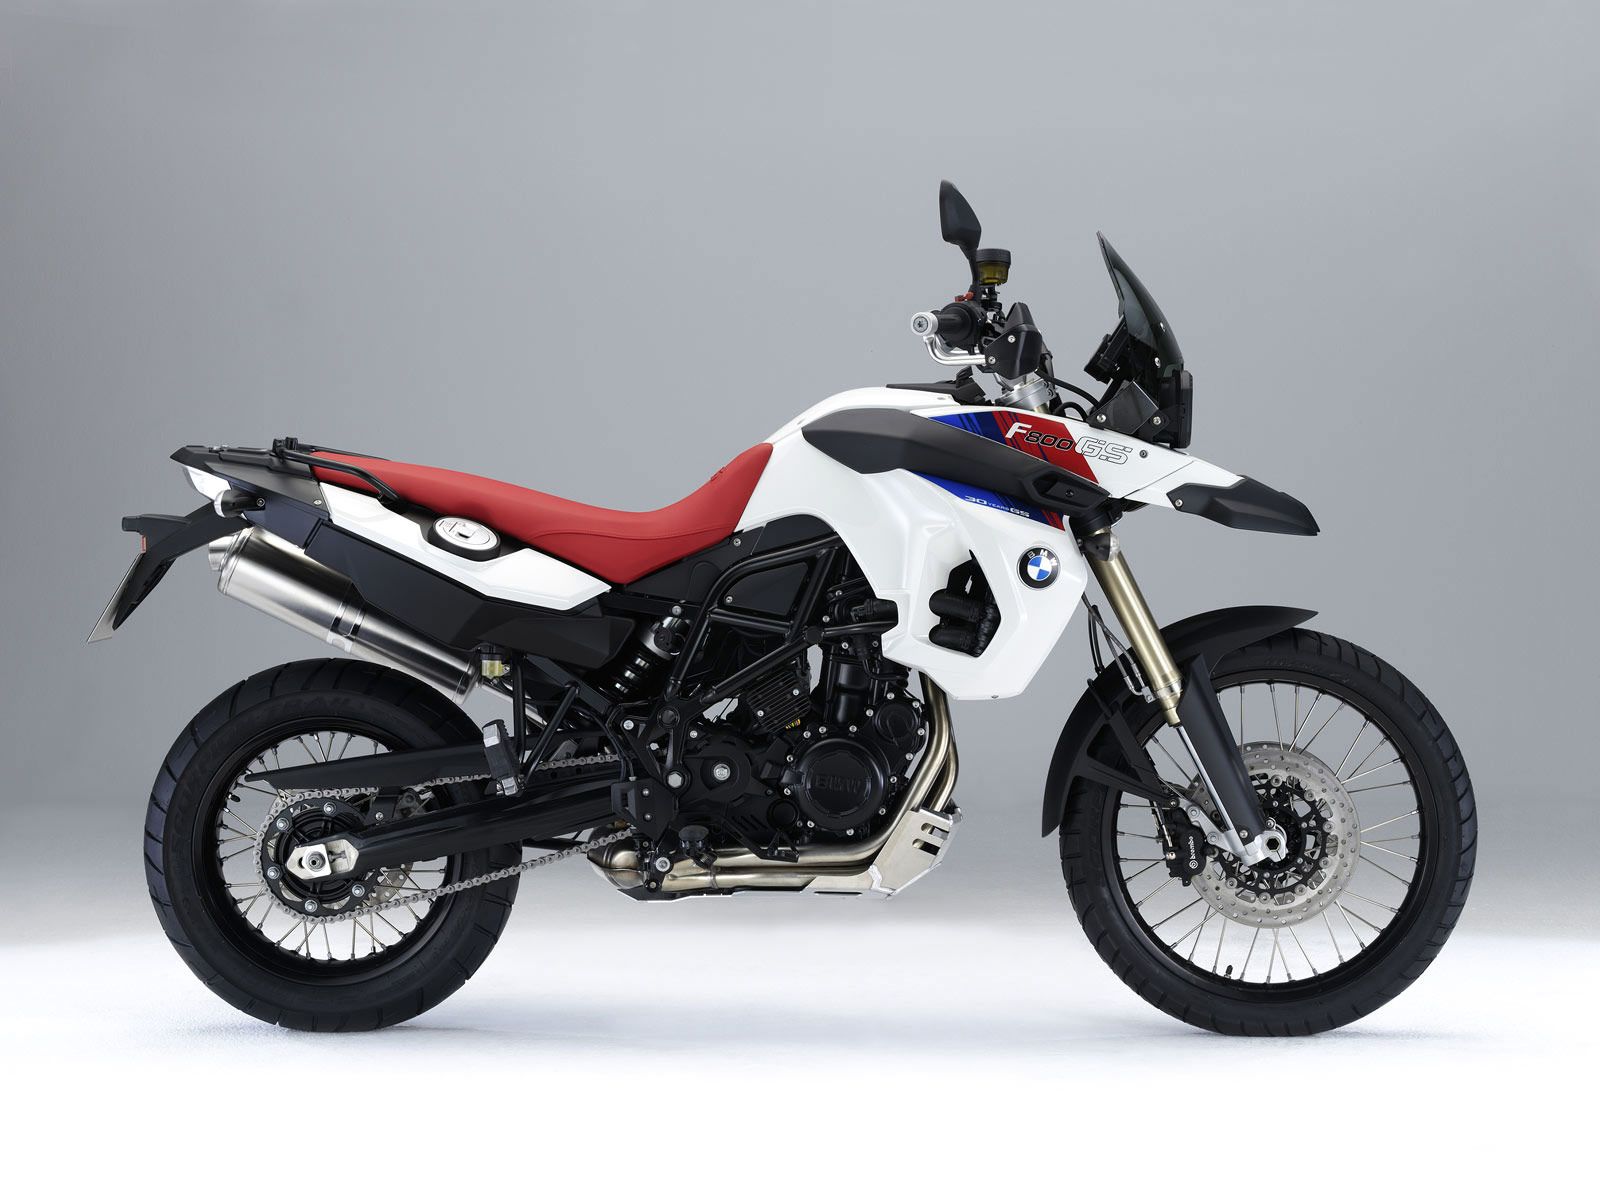 auto insight 2011: BMW F800GS 30 Years GS (2010) wallpaper